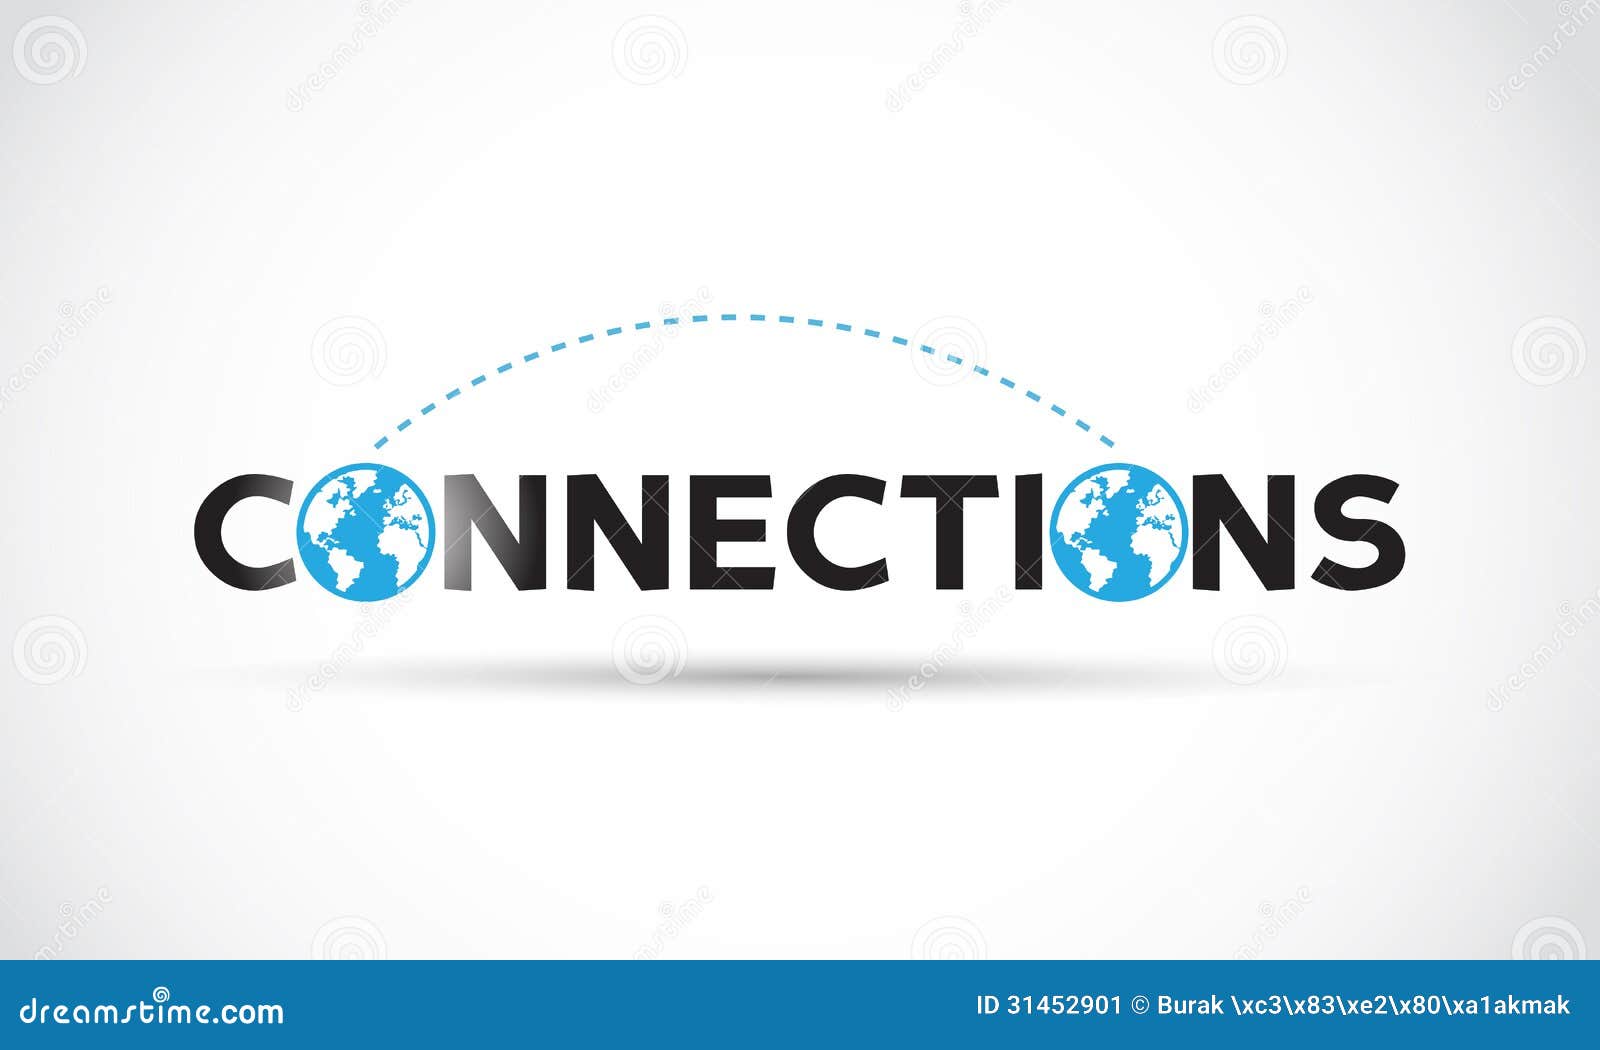 connections concept